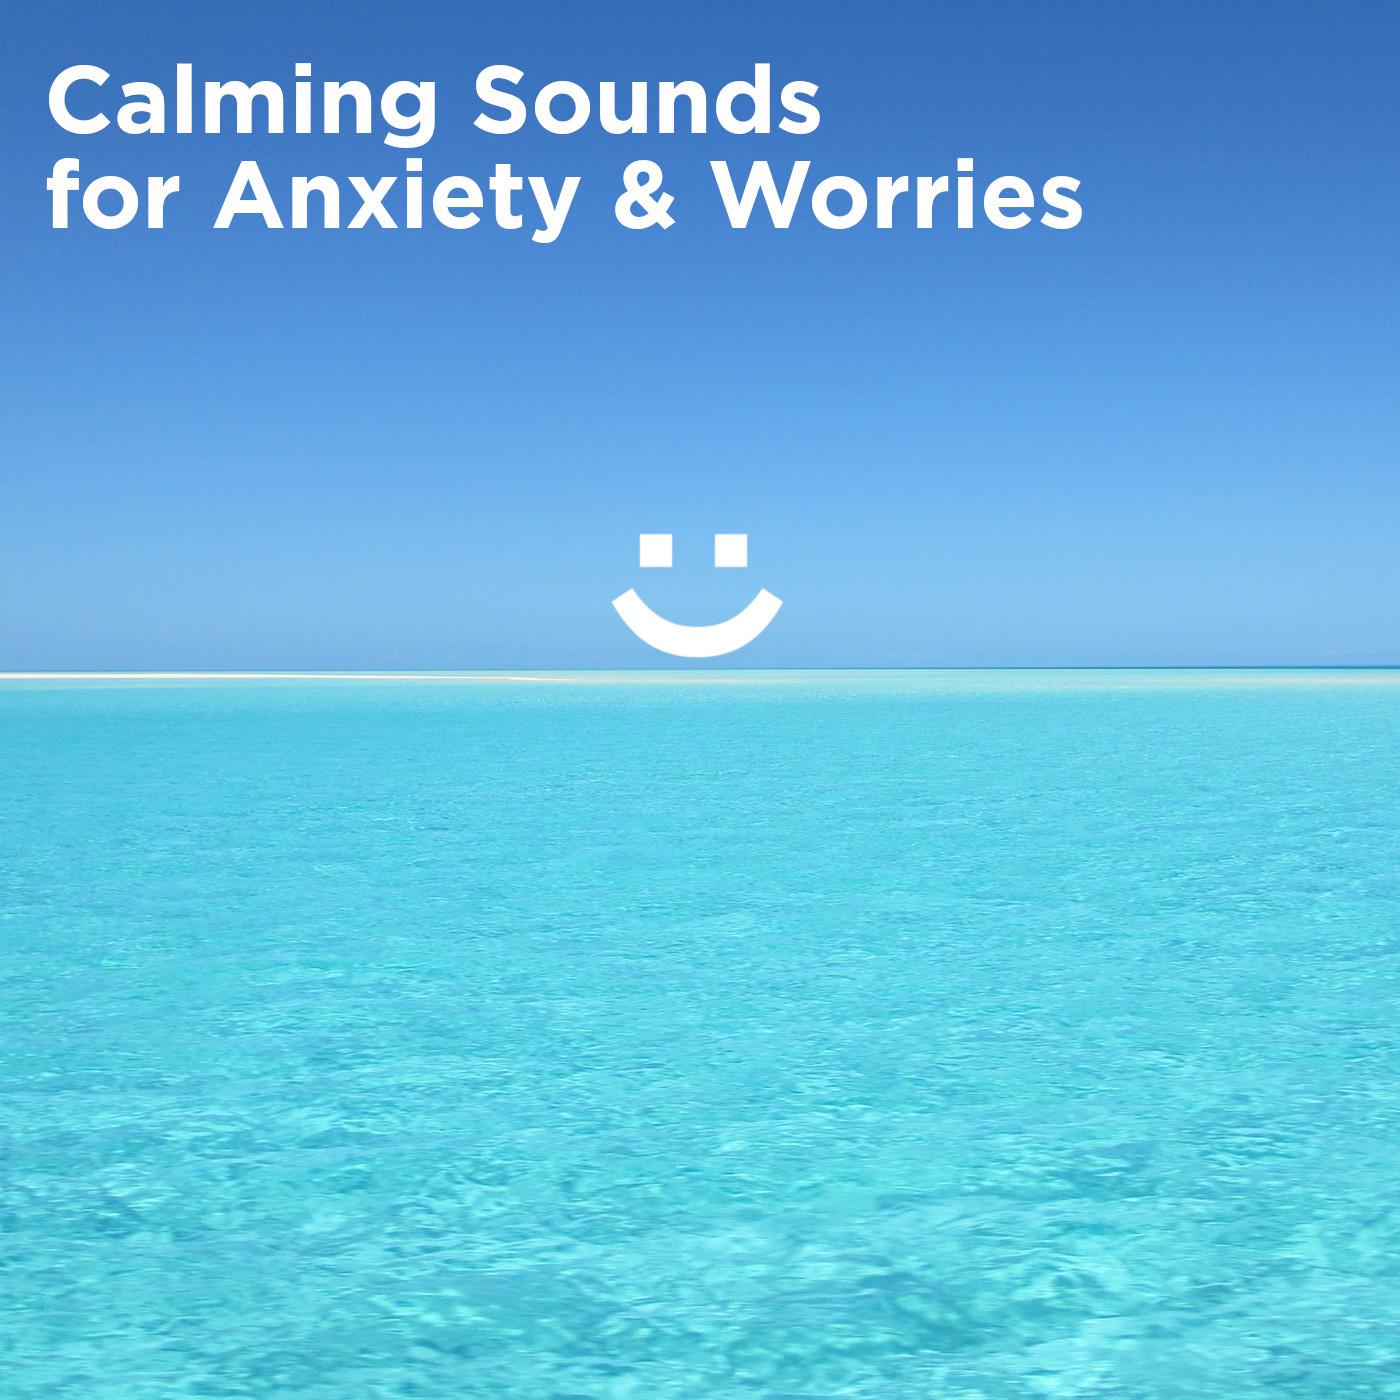 Calming Sounds for Anxiety & Worries